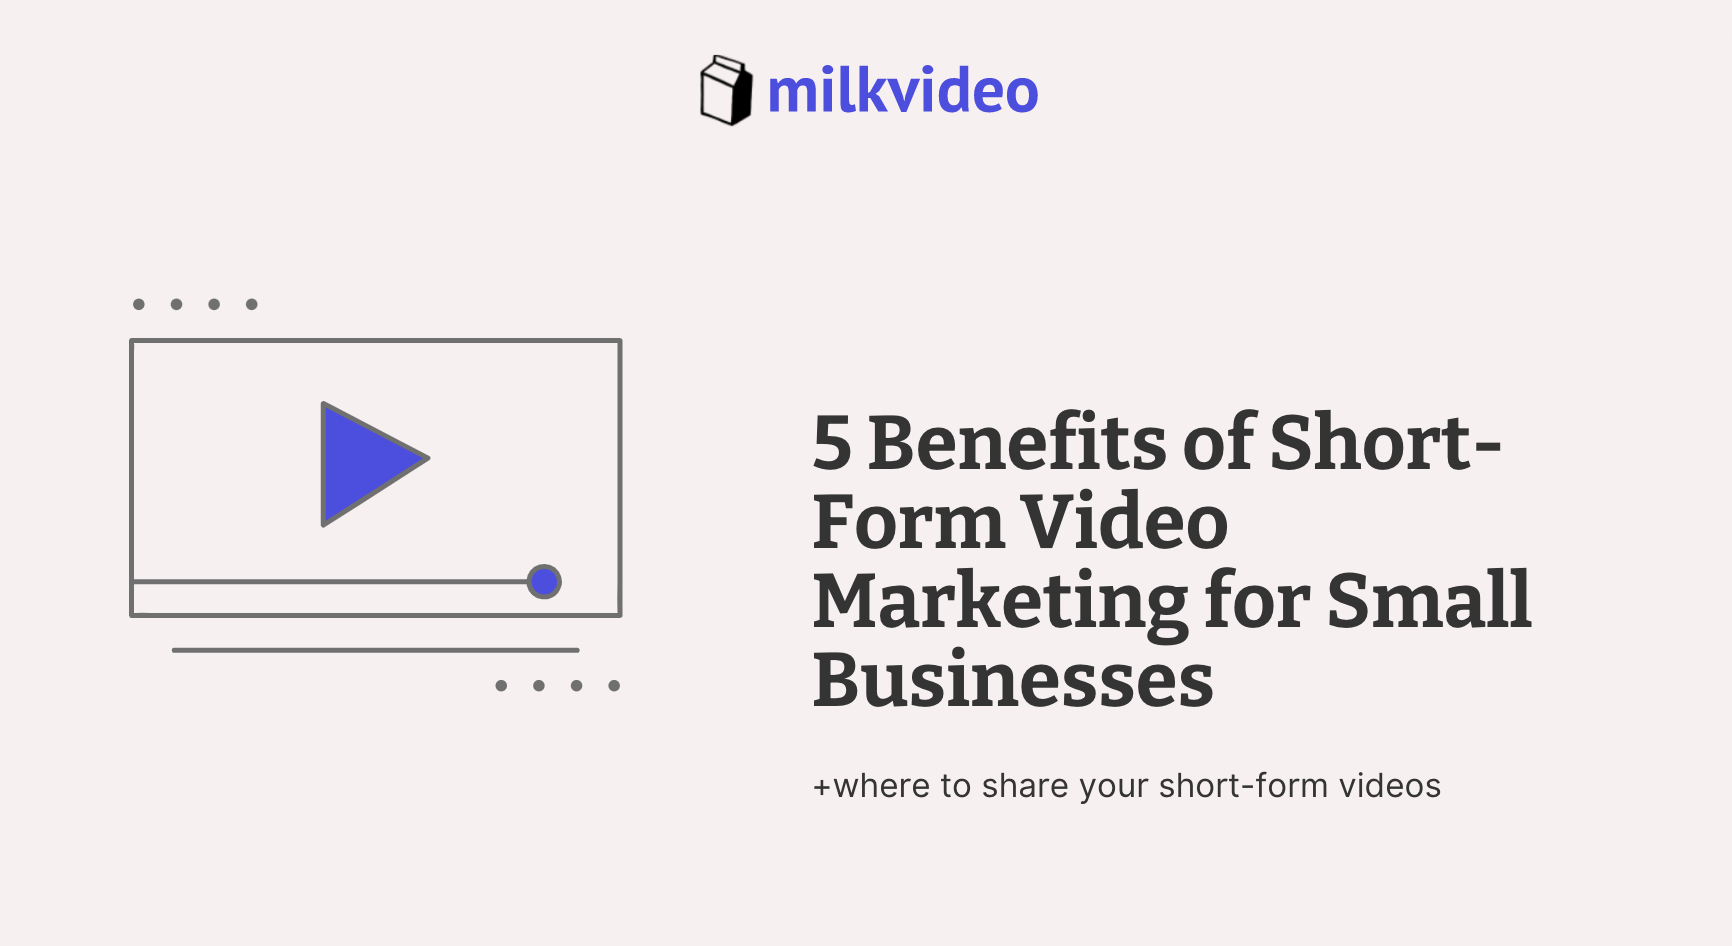 5 Benefits of Short-Form Video Marketing for Small Businesses